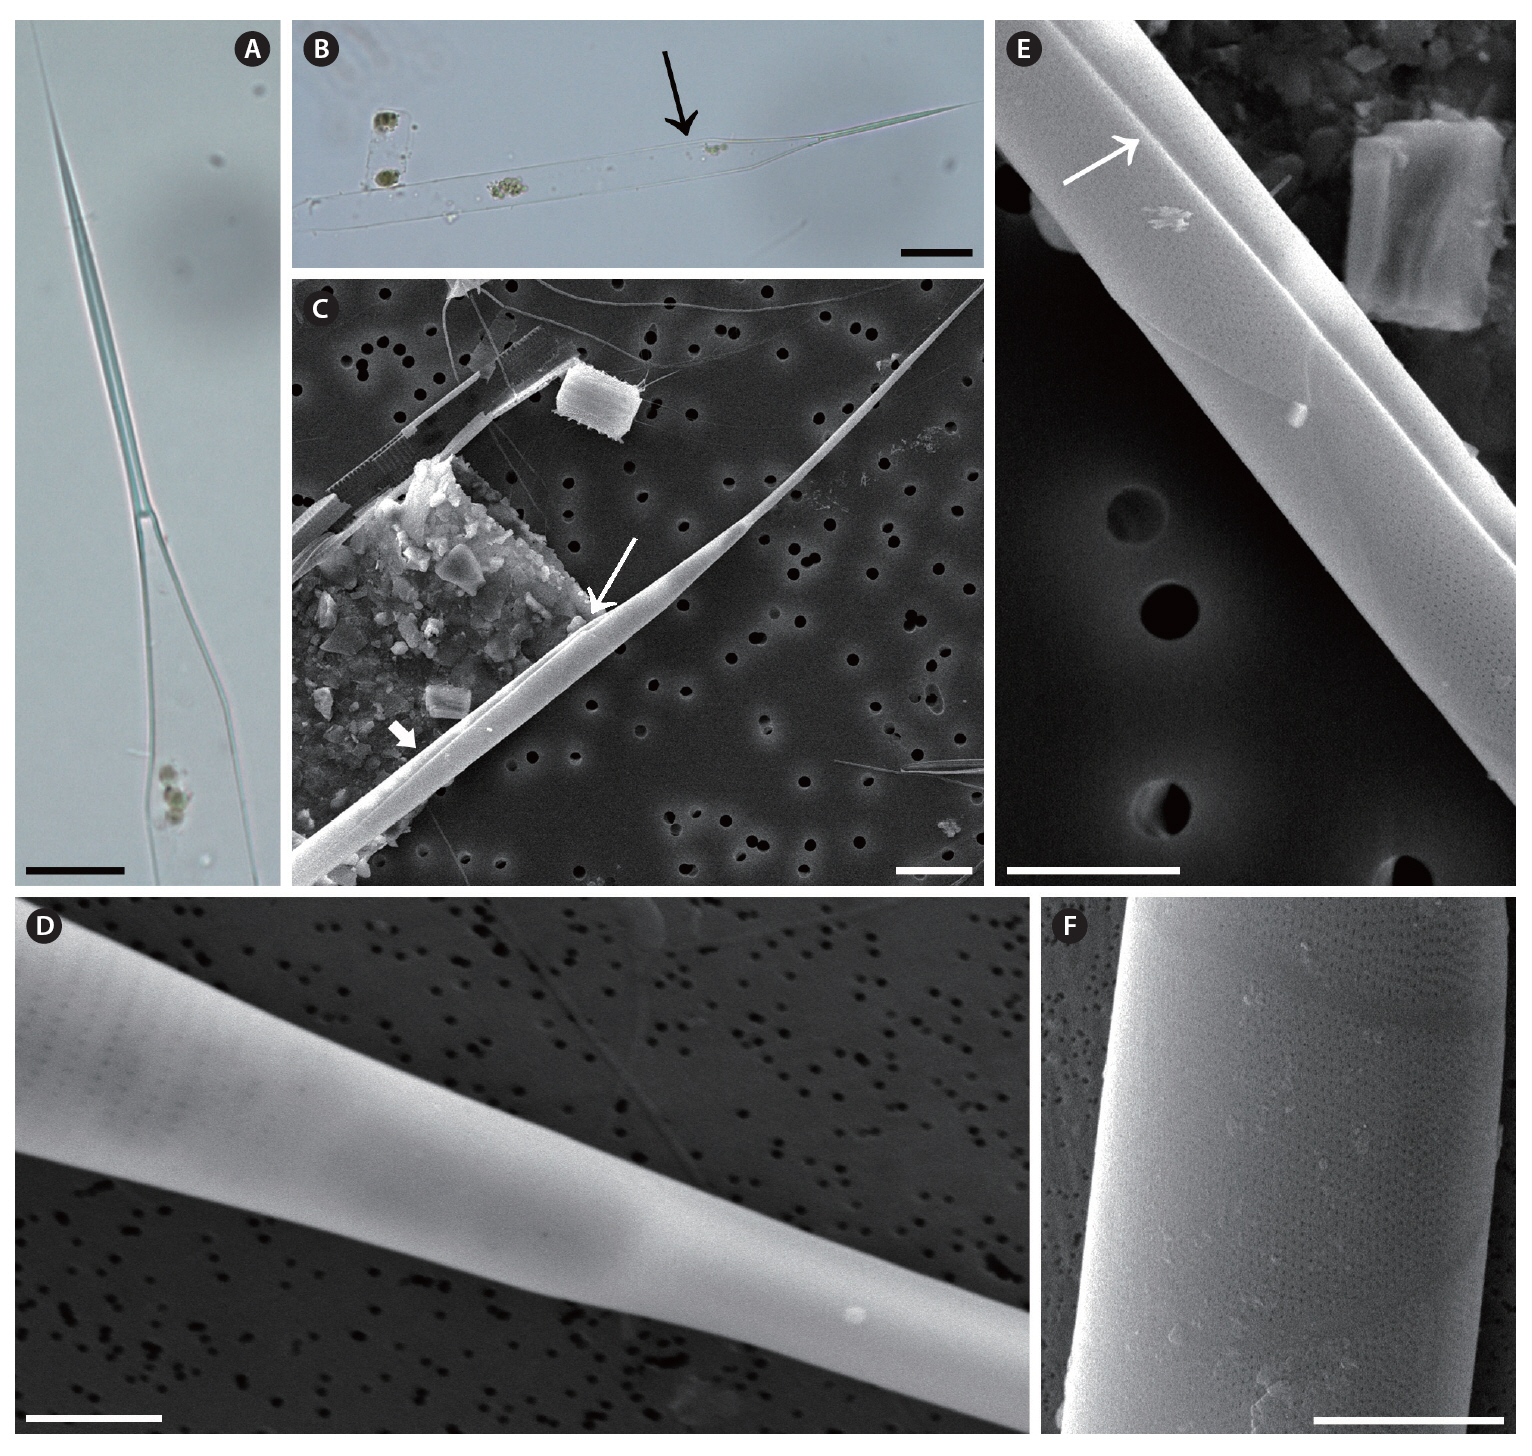 Rhizosolenia pungens. (A) Apical part of valve light microscopy (LM). (B) Apical part of valve with invisible clasper (arrow) LM. (C) Apical part of valve external process clasper (thin arrow) and thin groove shaped contiguous area (thick arrow) scanning electron microscopy (SEM). (D) Basal part of external process which lacks otaria SEM. (E) Thin groove-shaped contiguous area (arrow) SEM. (F) Detail of areola one of the narrow slit-shaped areolae in girdle segments SEM. Scale bars represent: A & C 10 ㎛; B 20 ㎛; D 2 ㎛; E & F 5 ㎛.